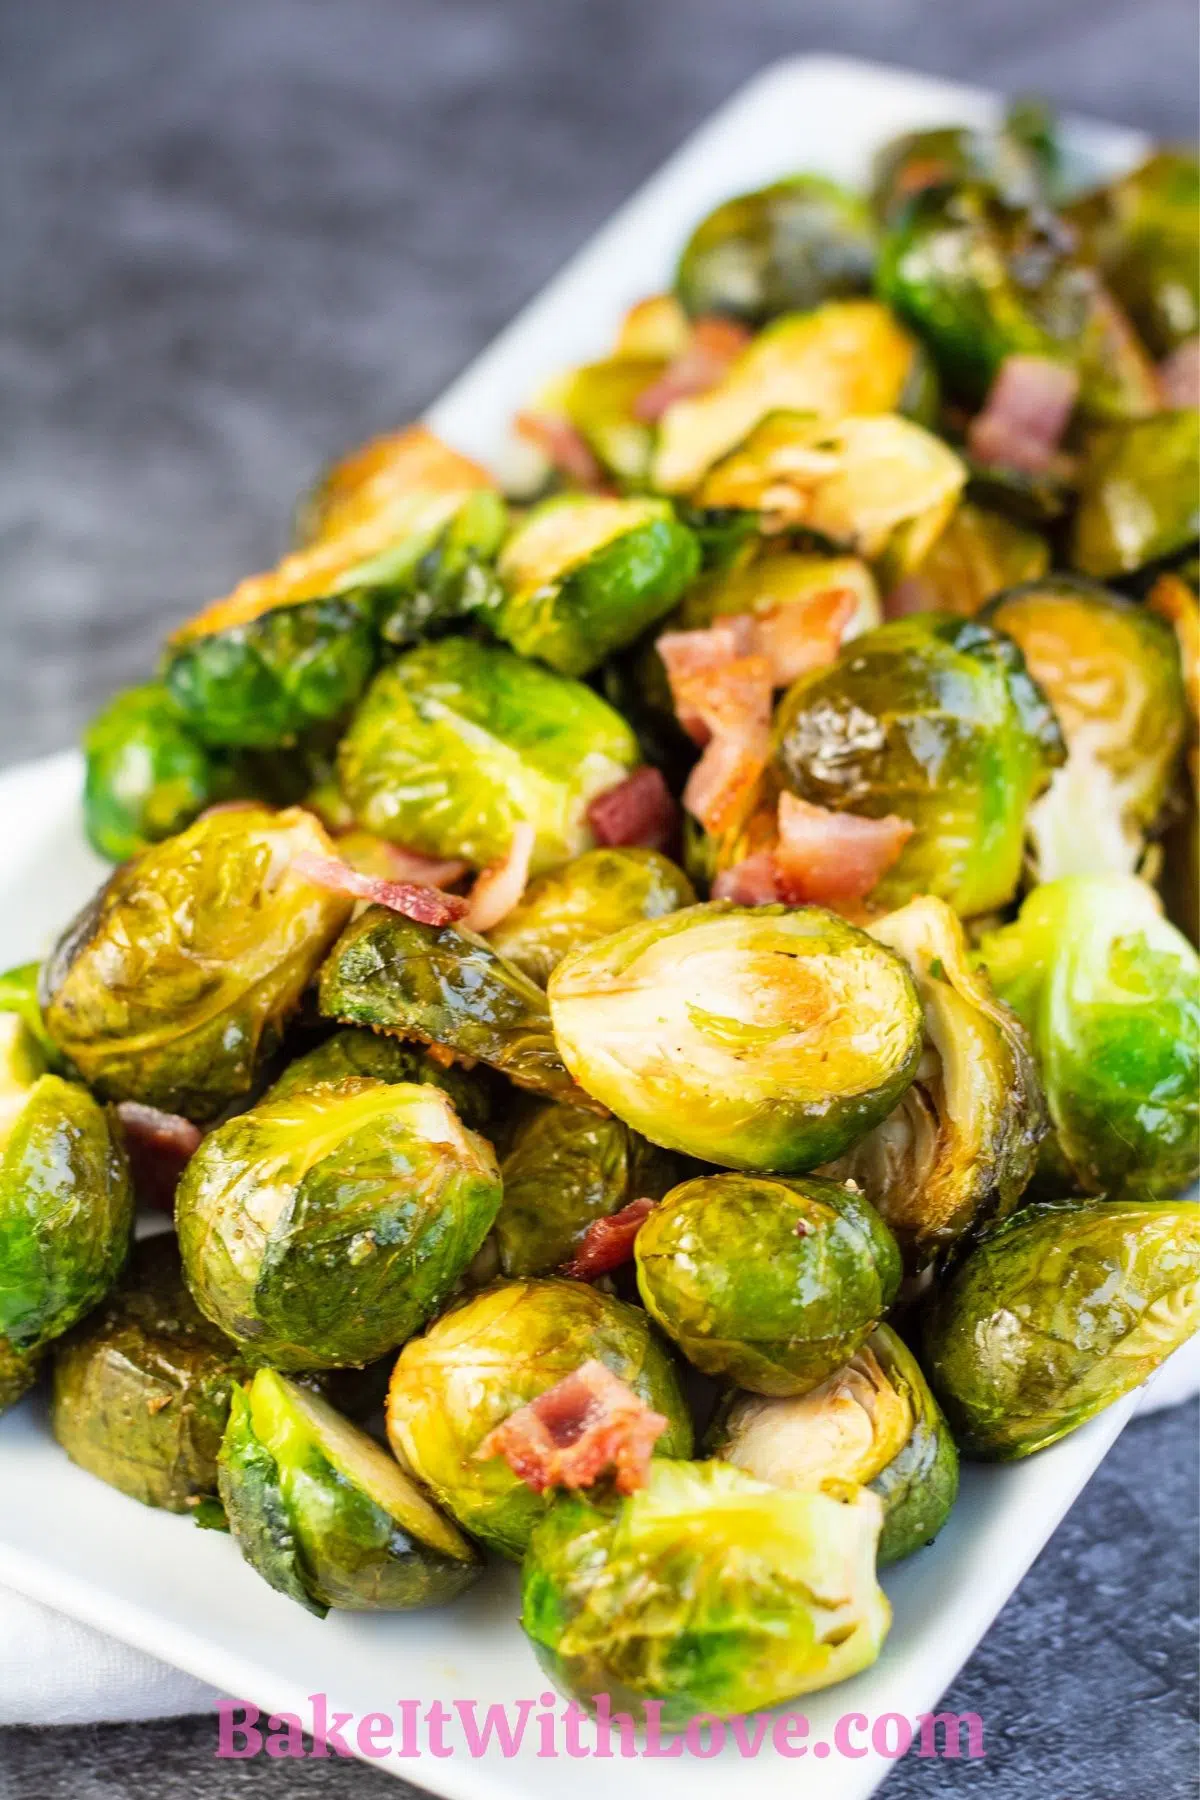 Hearty smoked brussel sprouts tossed in batter with bacon and served on white platter.